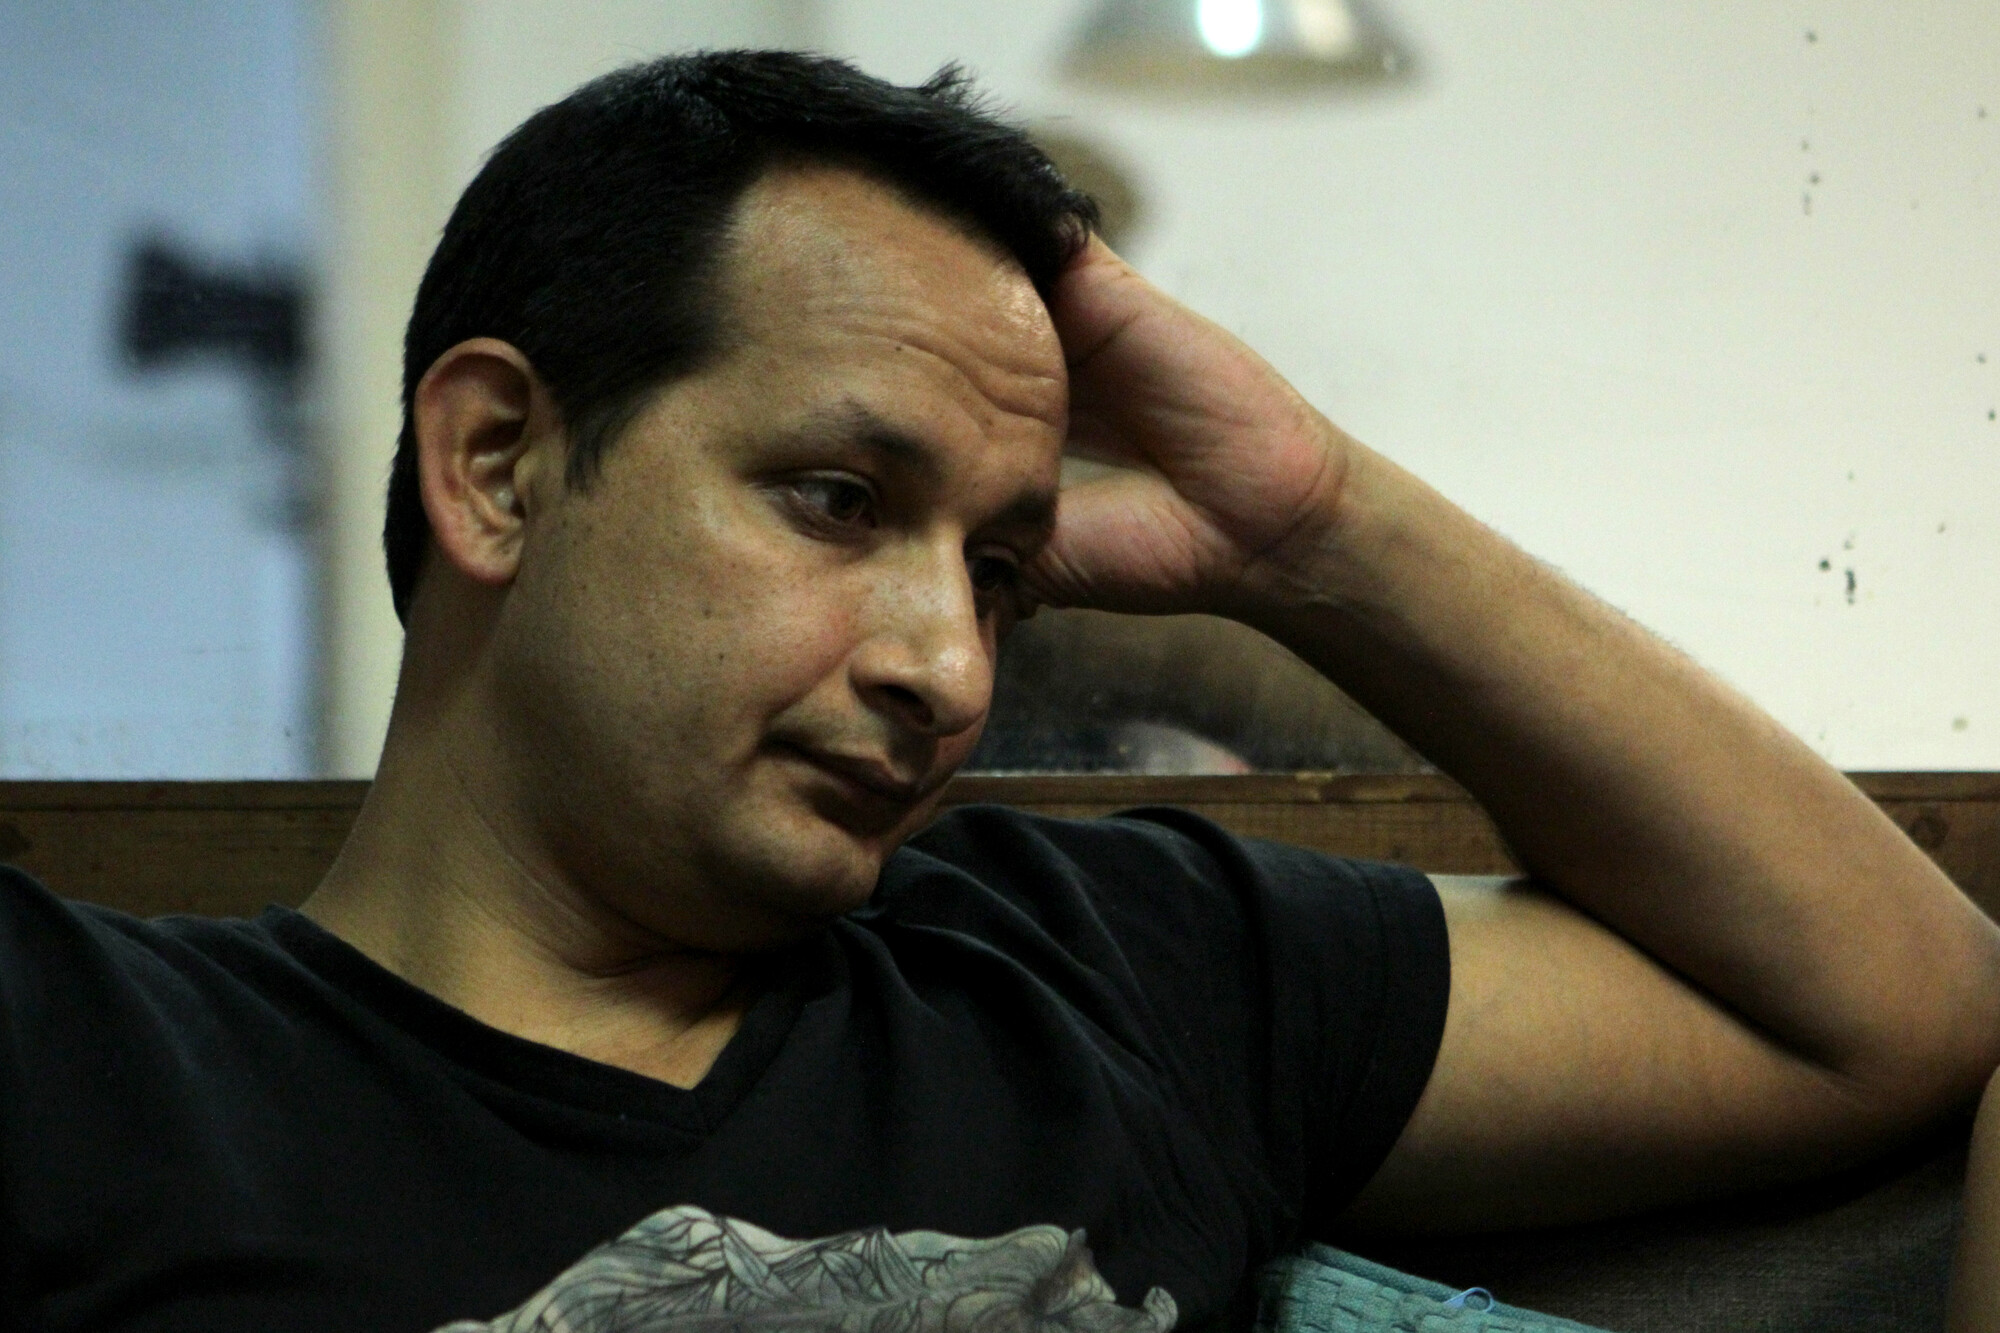 Man in black shirt resting his head in his hand. 